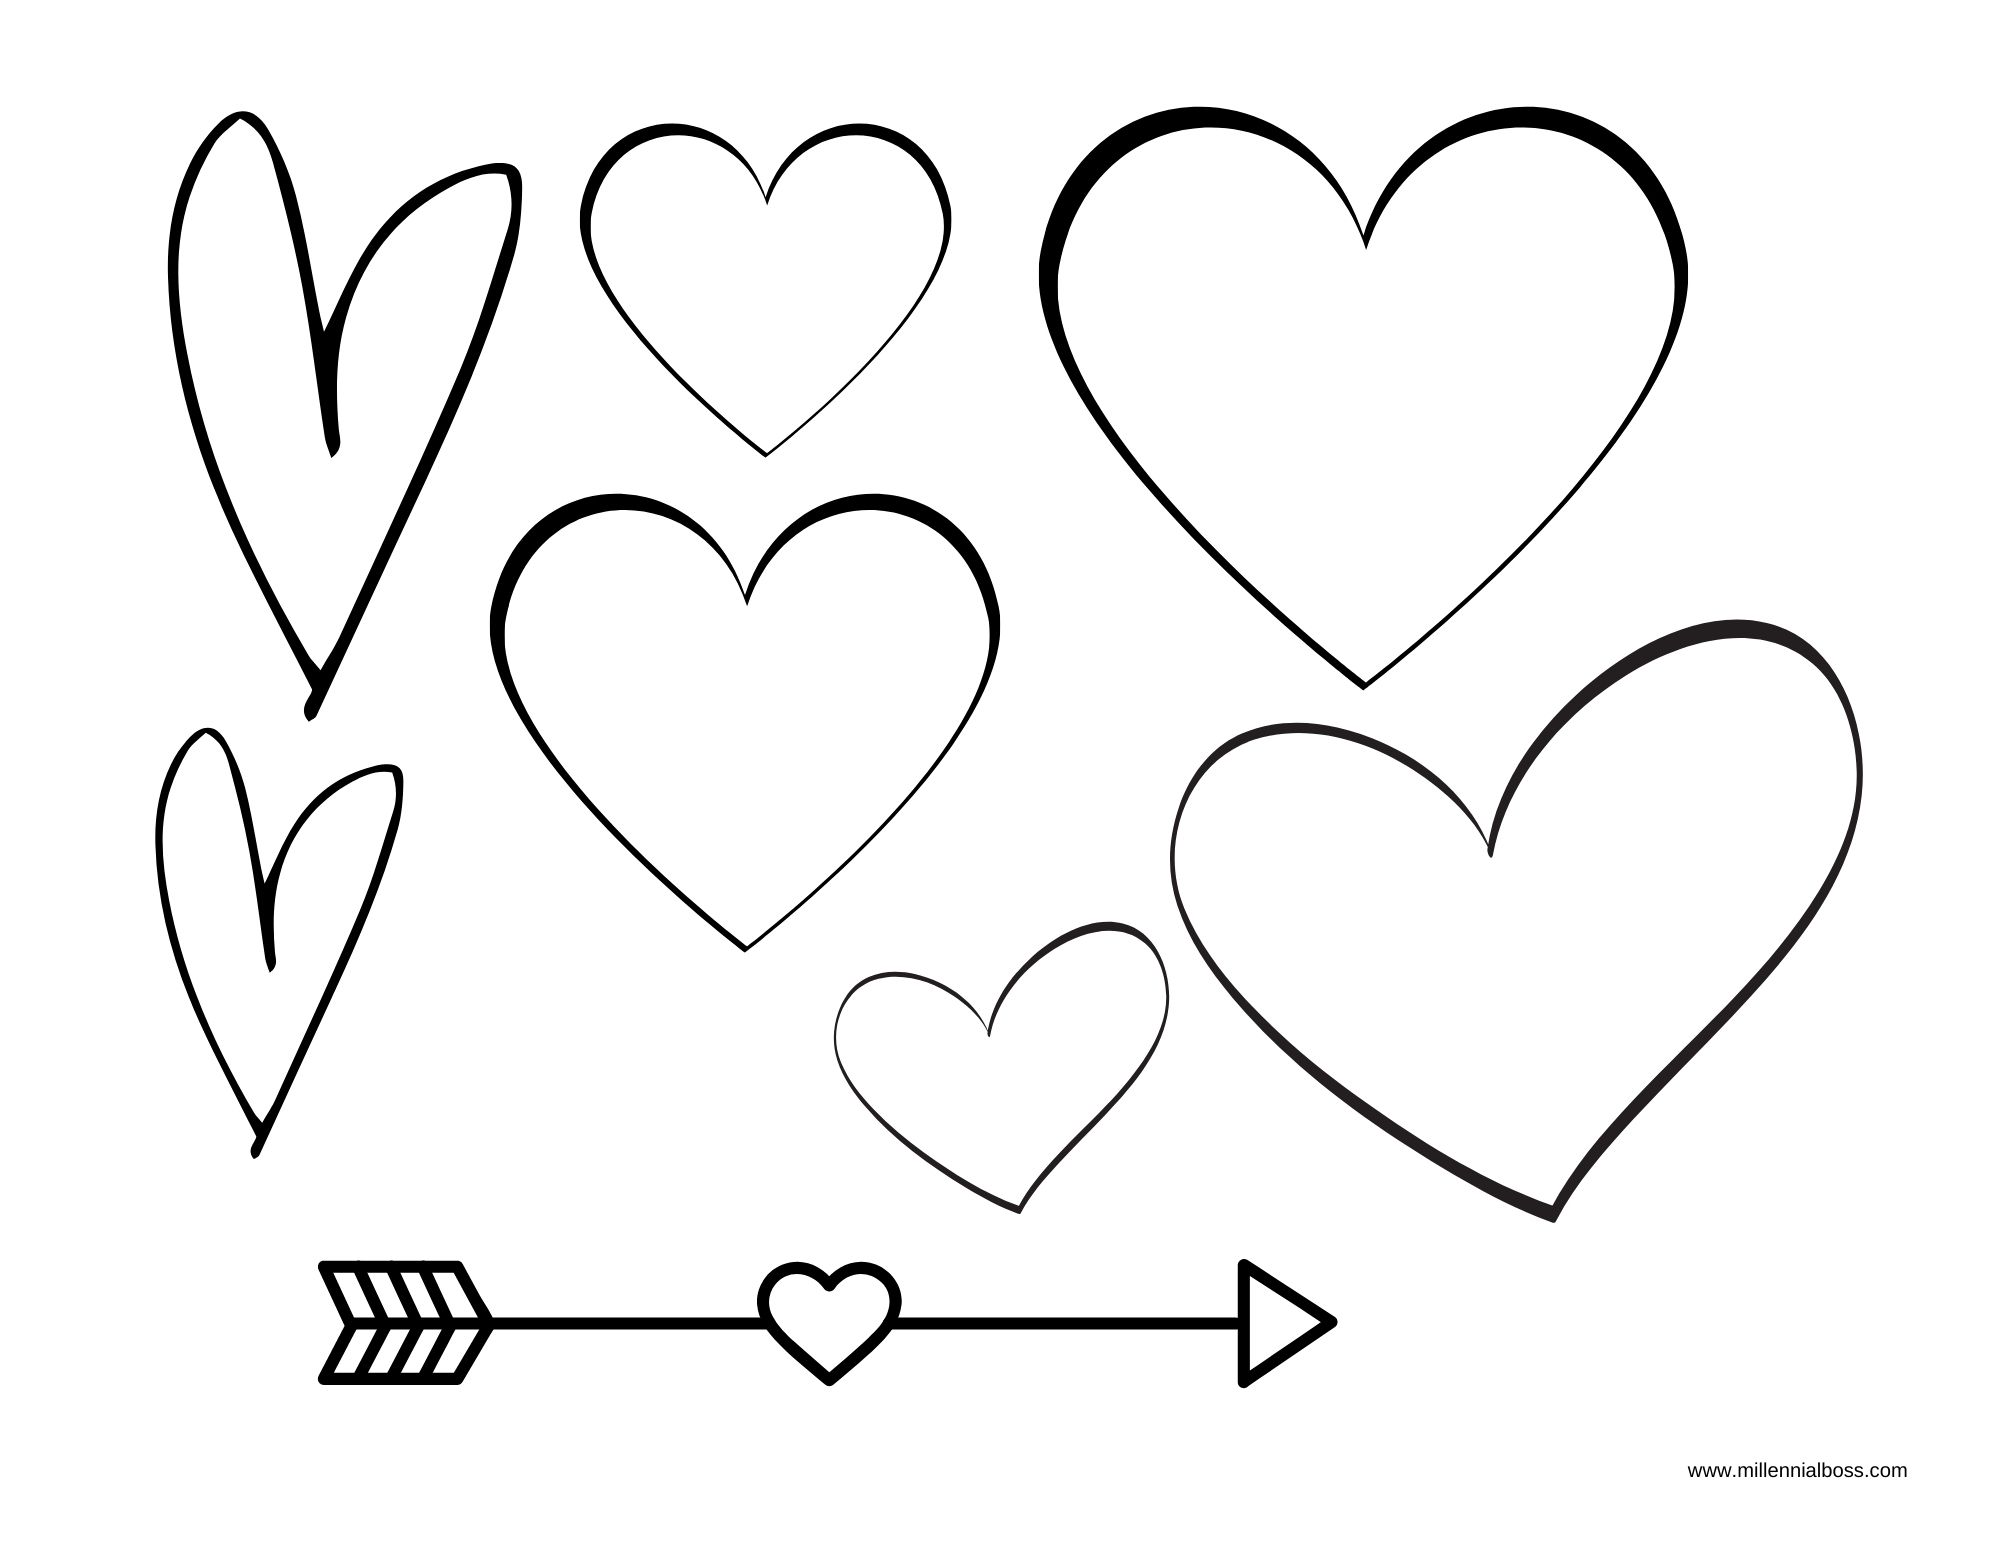 printable-heart-templates-different-sizes